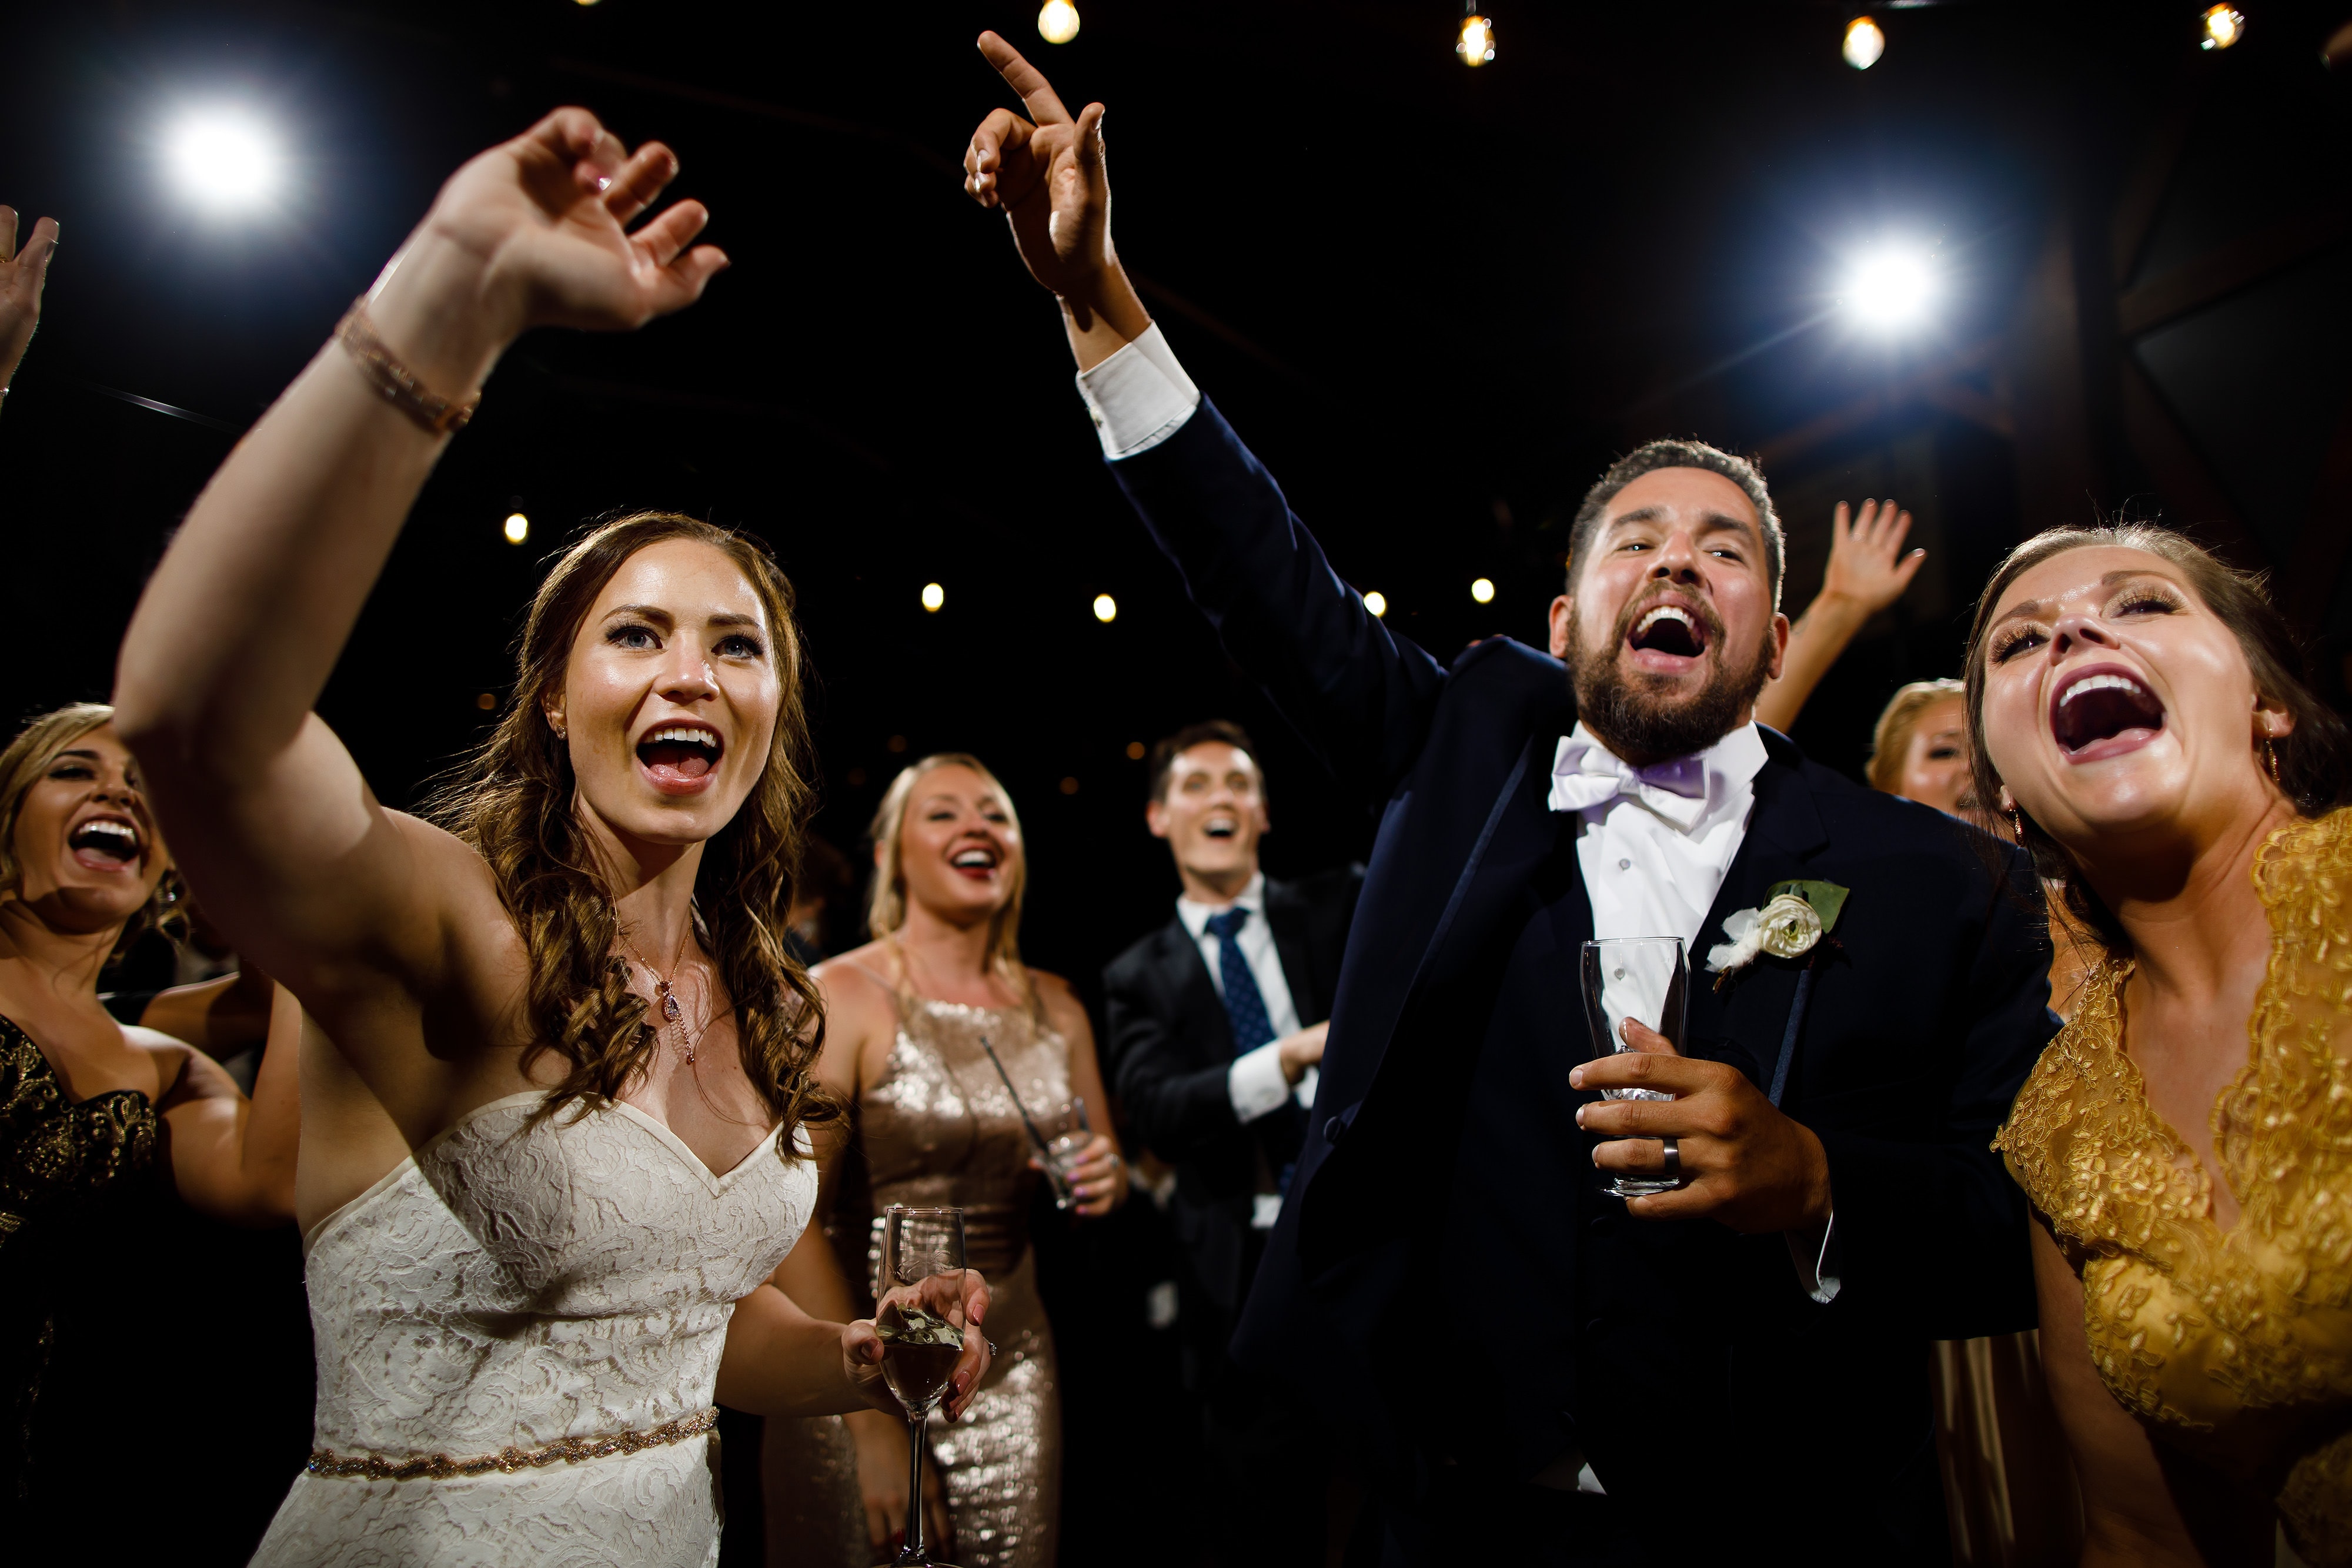 Nick and Sharon dance with friends at their TenMile Station wedding in Breckenridge